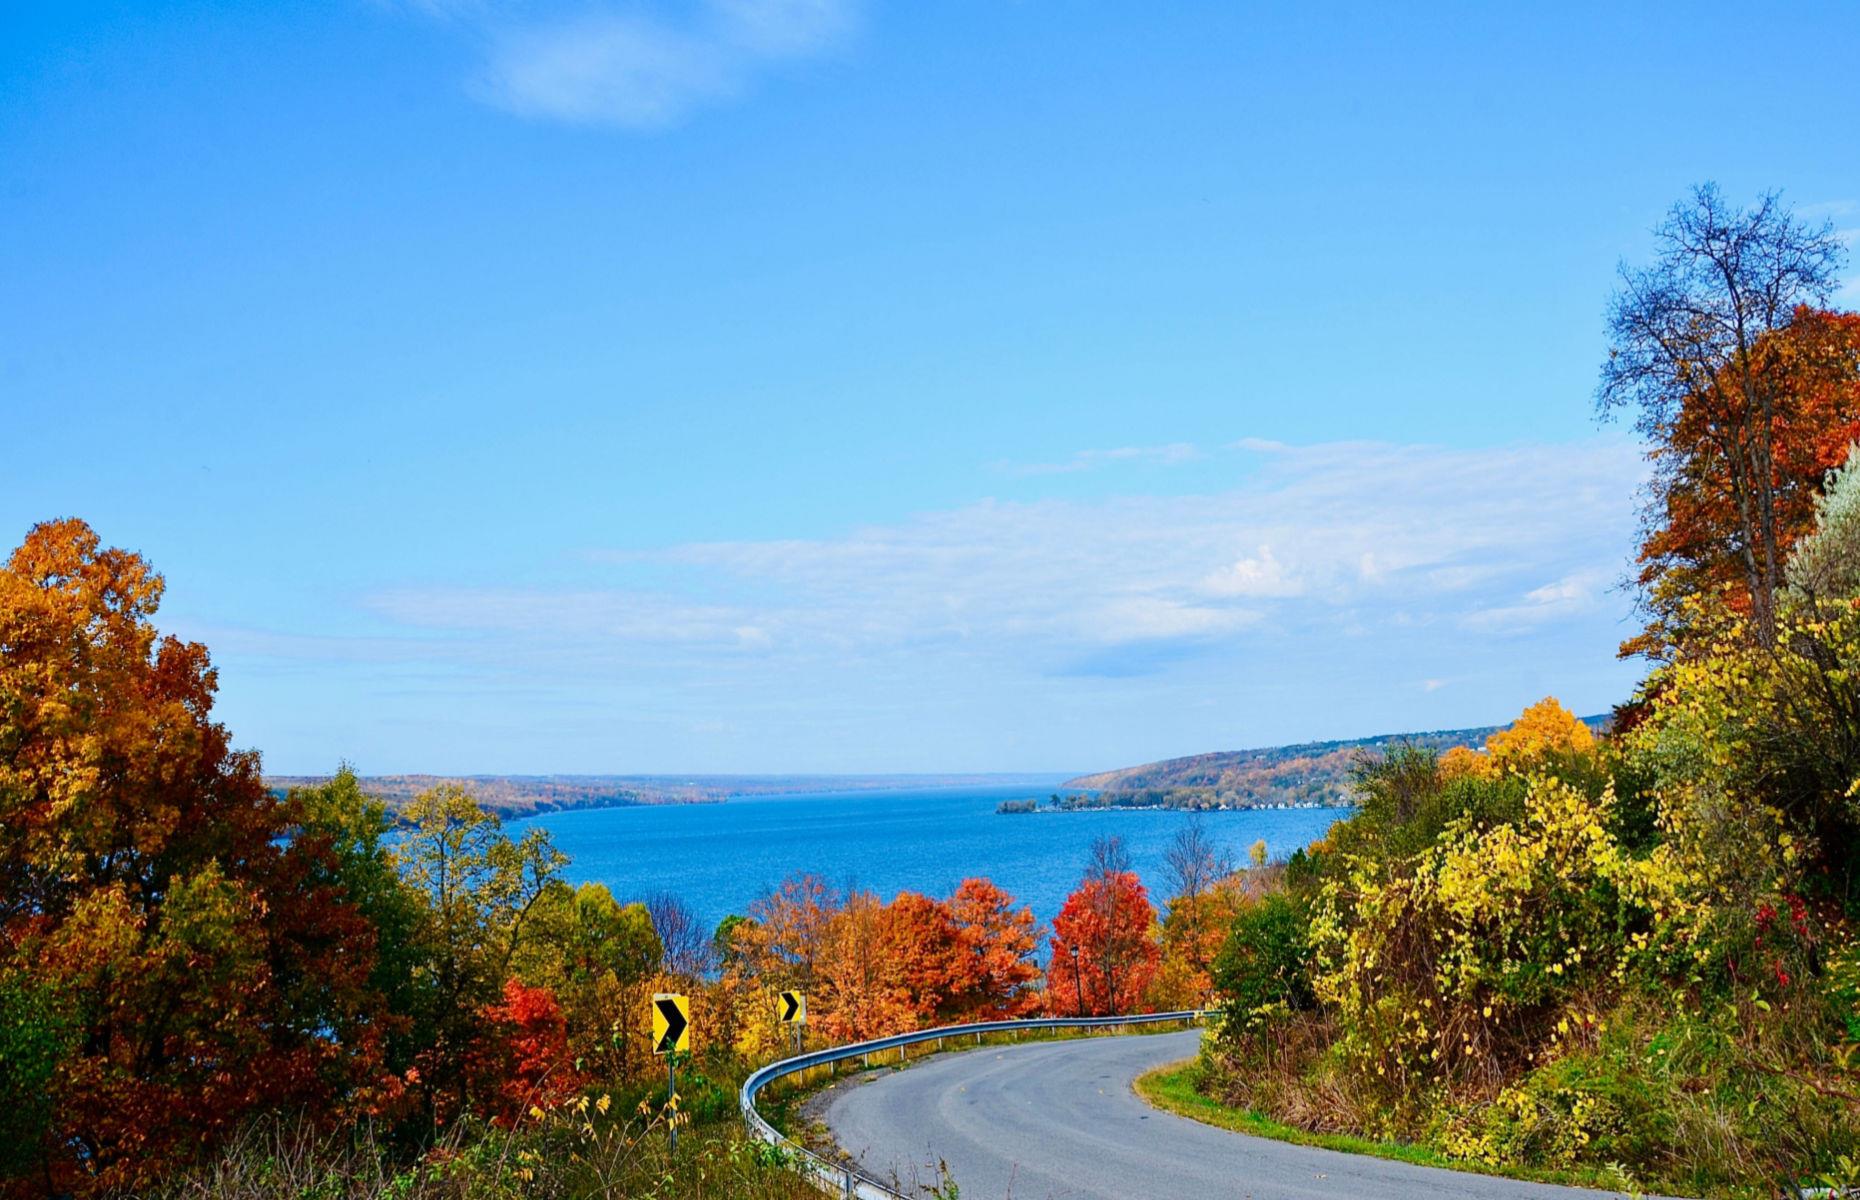 <p>Of the 11 spindly stretches of water that make up New York’s Finger Lakes, Cayuga is perhaps the easiest to explore via car. It’s skimmed by an 87-mile (140km) scenic byway that’s designed to be taken at a leisurely pace. Running from Seneca Falls in the north to Ithaca in the south and looping around the opposite shore, <a href="https://cayugalake.com/cayuga-lake-scenic-byway/"><span>Cayuga Lake Scenic Byway</span></a> is ideal for families seeking a mix of outdoor adventures, pretty scenery and cute villages to explore.</p>